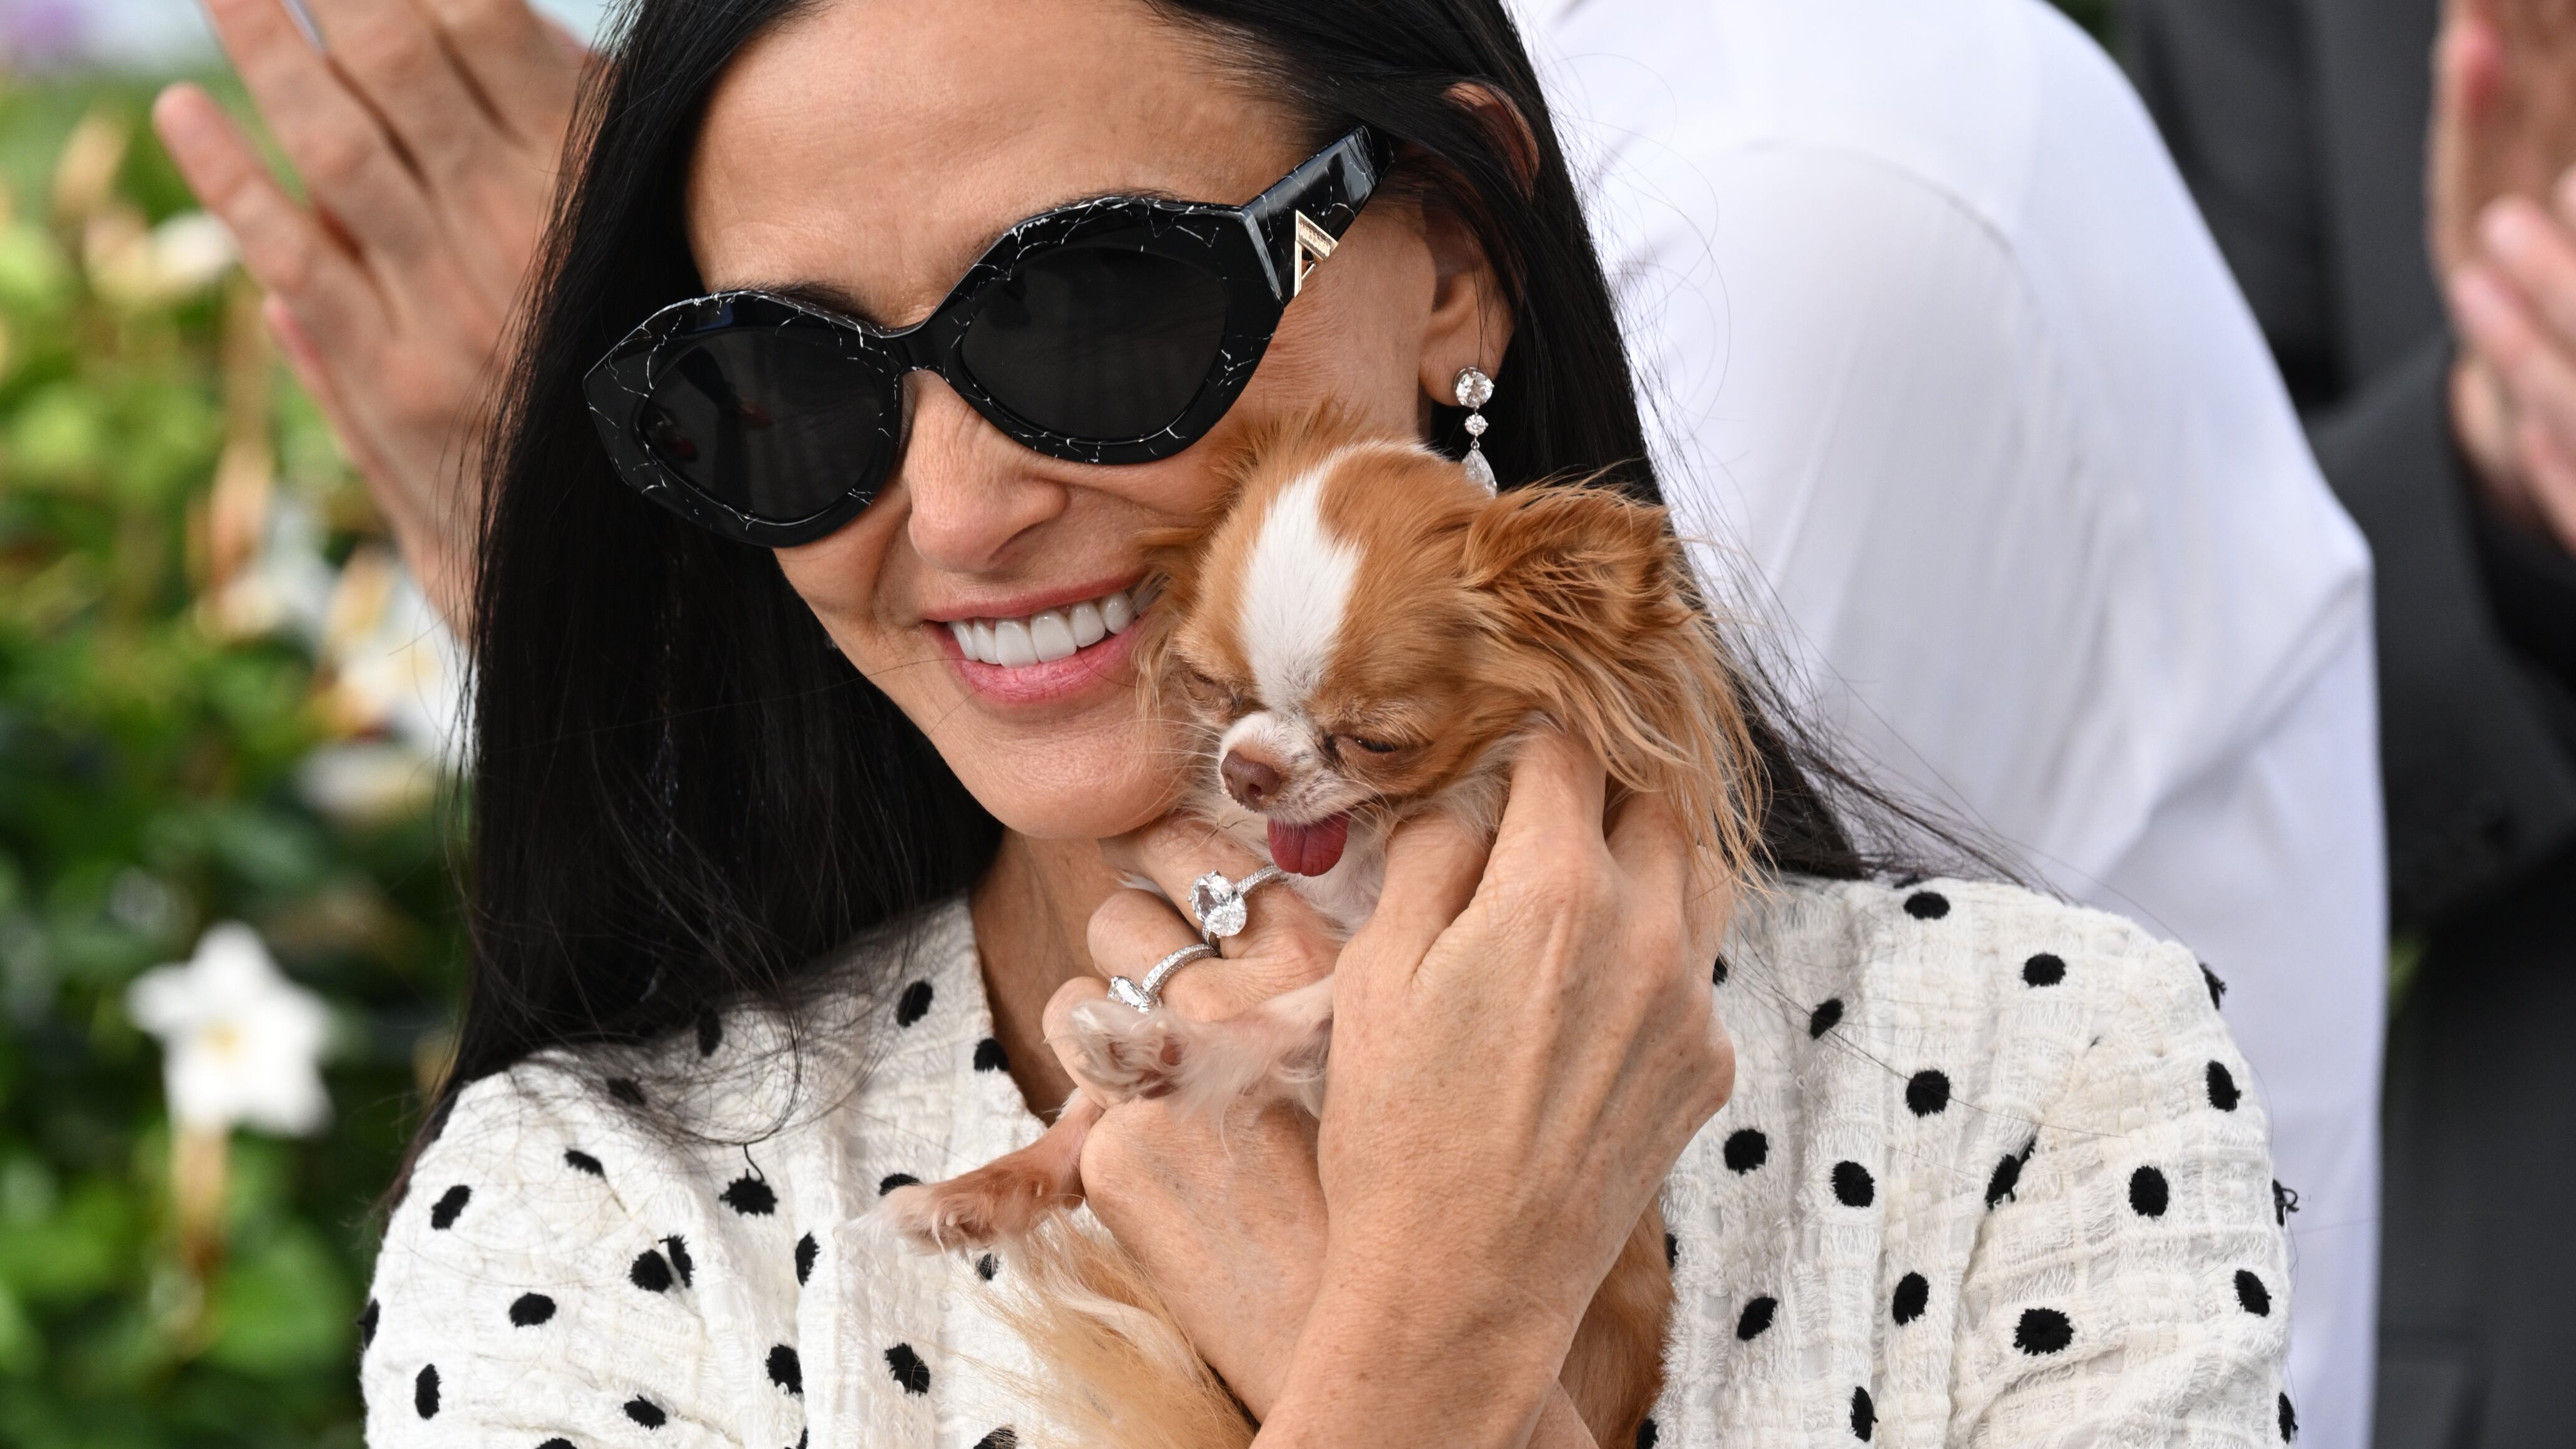 Demi Moore and her dog Pilaf at the photocall for The Substance during the Cannes Film Festival in France